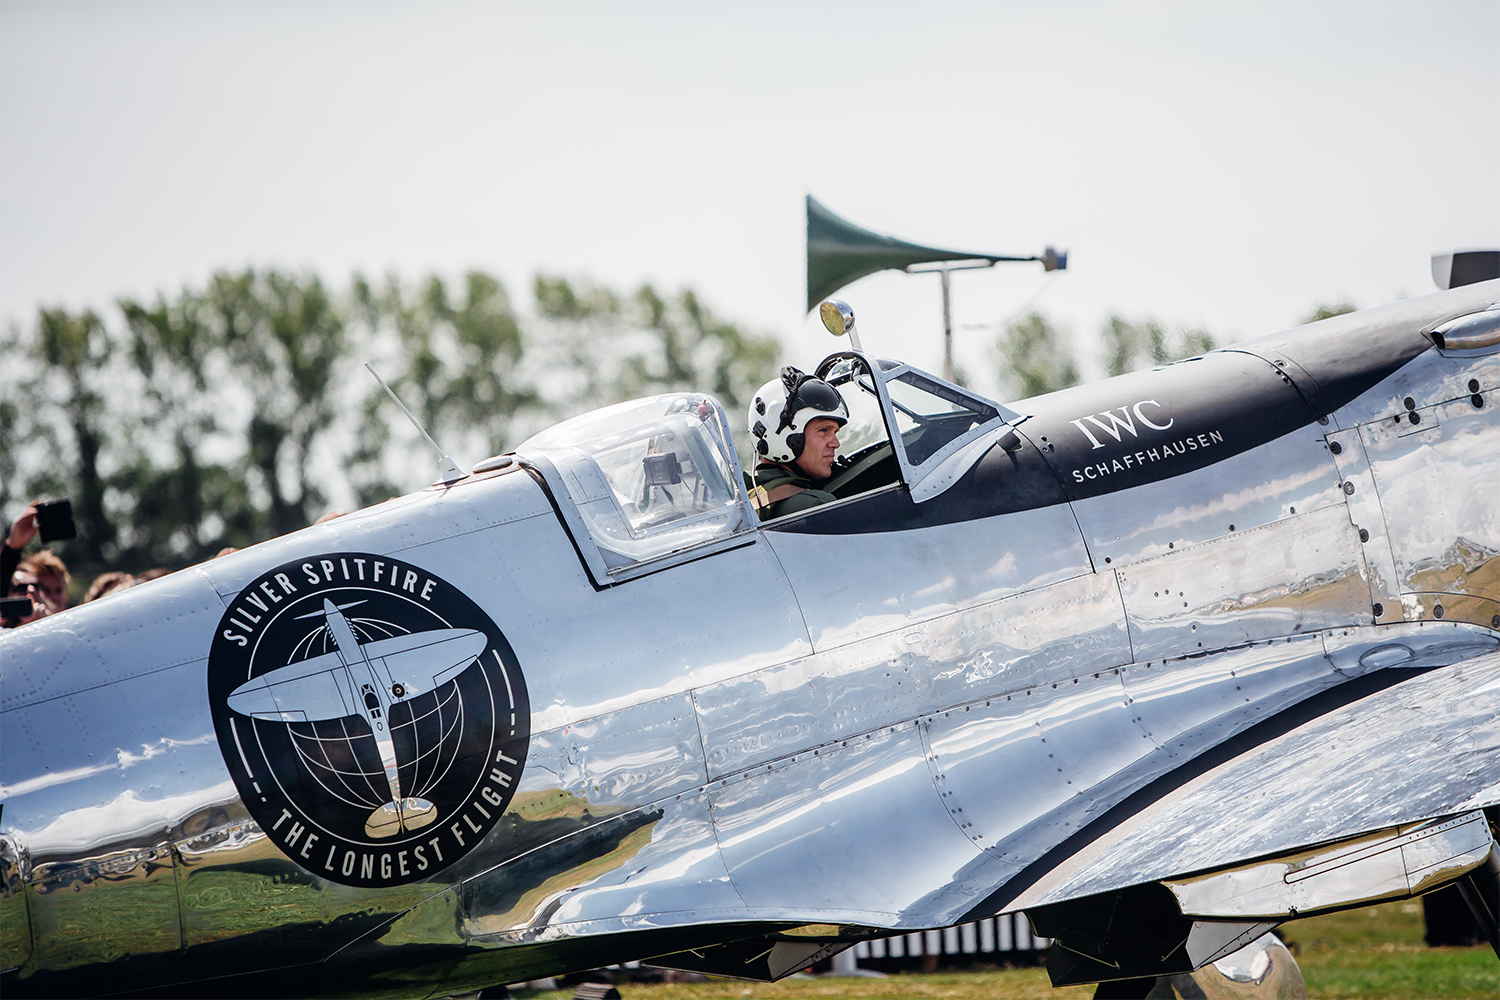 WWII Silver Spitfire Airplane at Goodwood Aerodrome